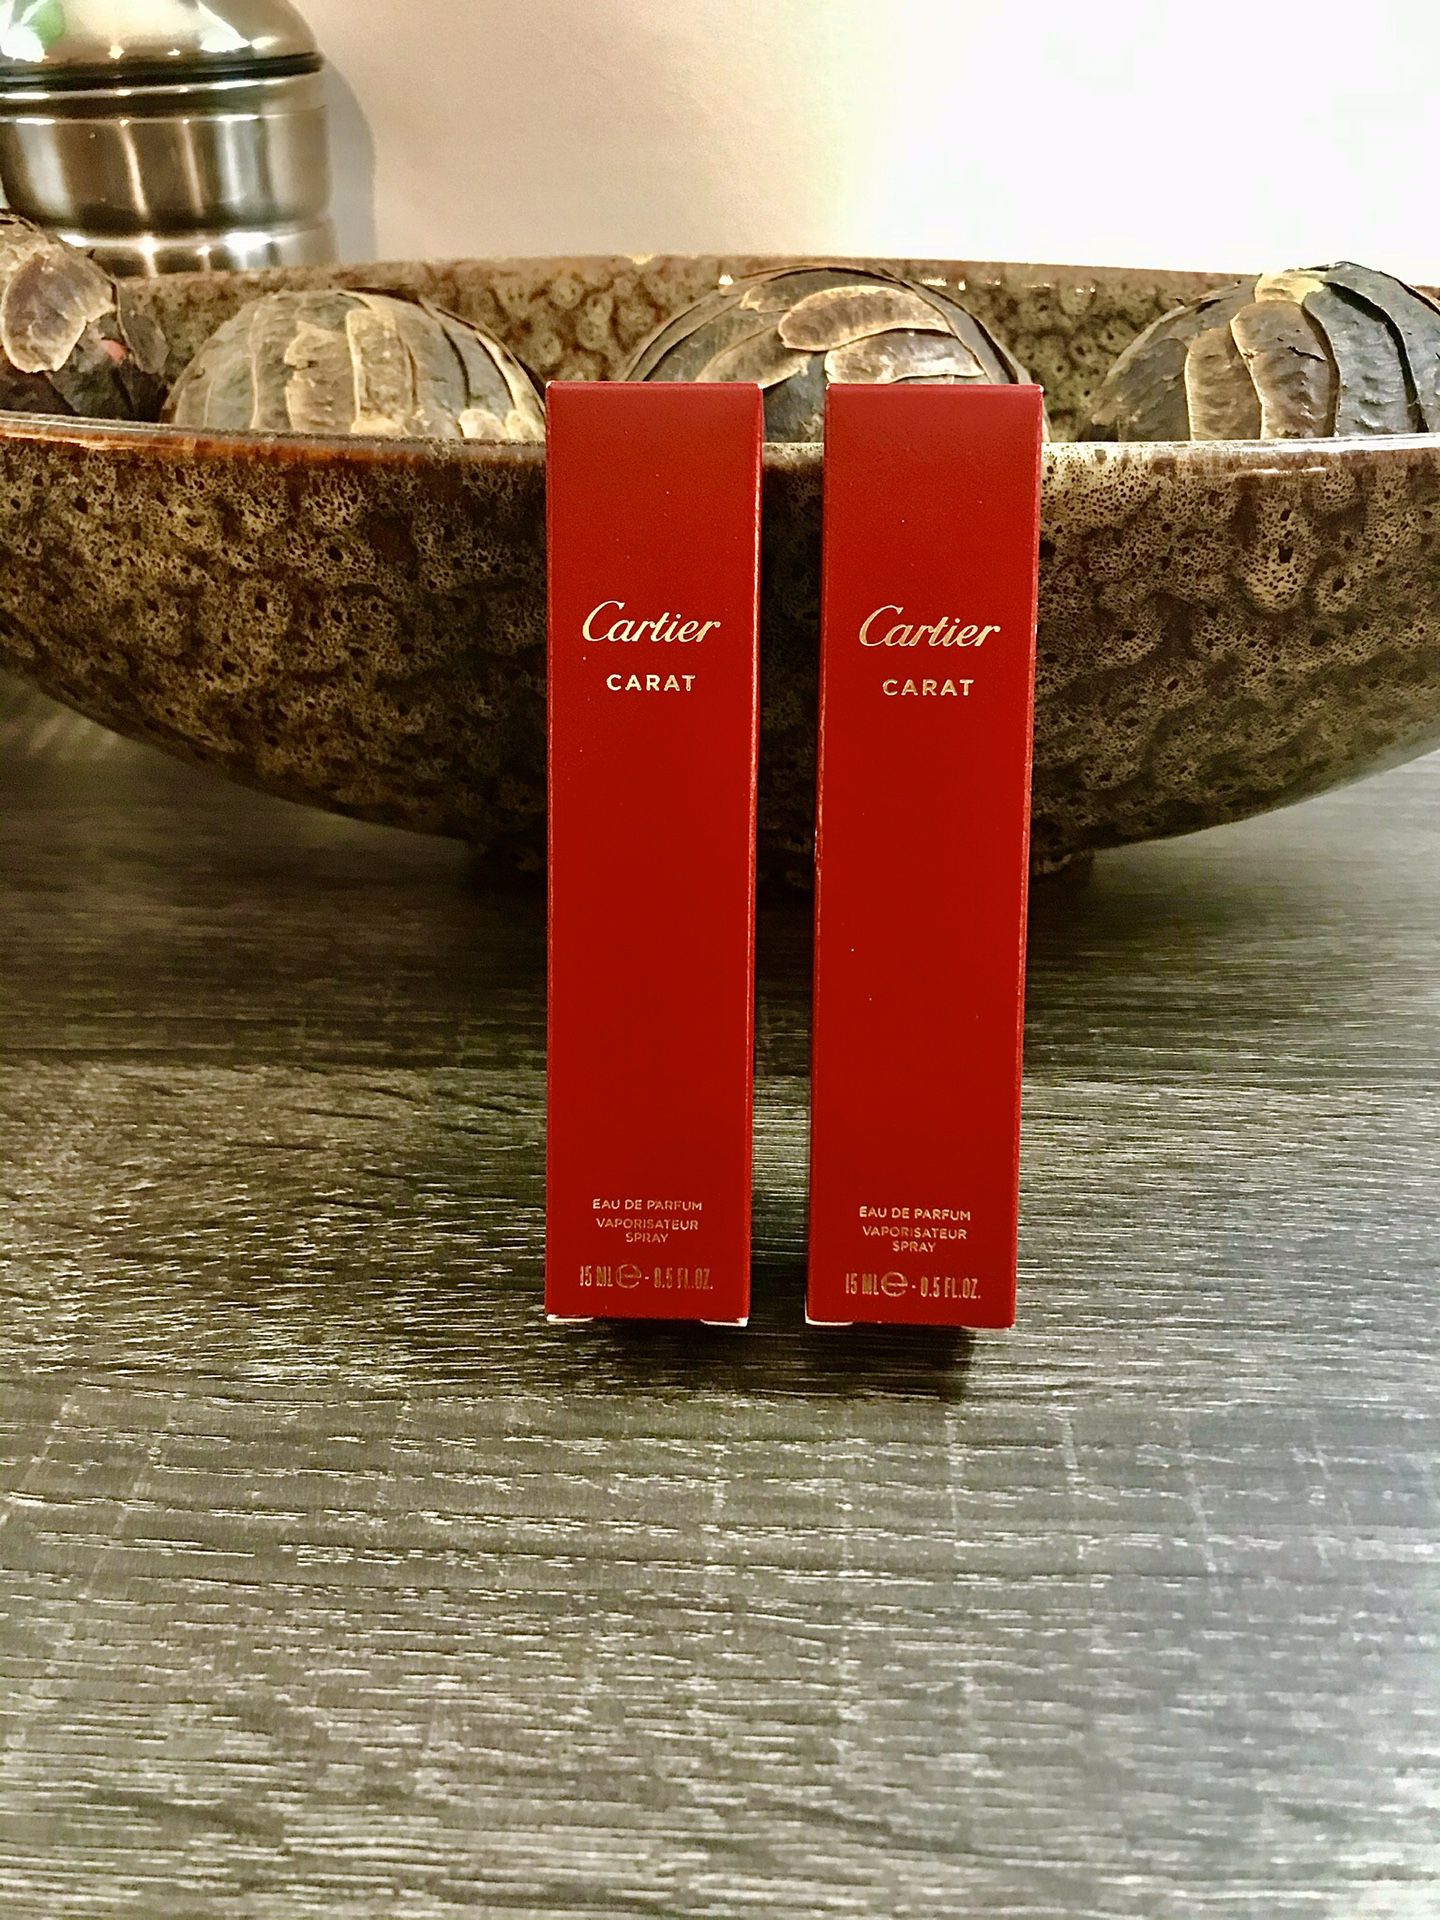 (2) Cartier Carat Eau De Parfum gift set Each bottle is 15ml 0.5FL OZ Valentines Day Special !!!!!!! A Total of 30 ml at a great price Authentic and